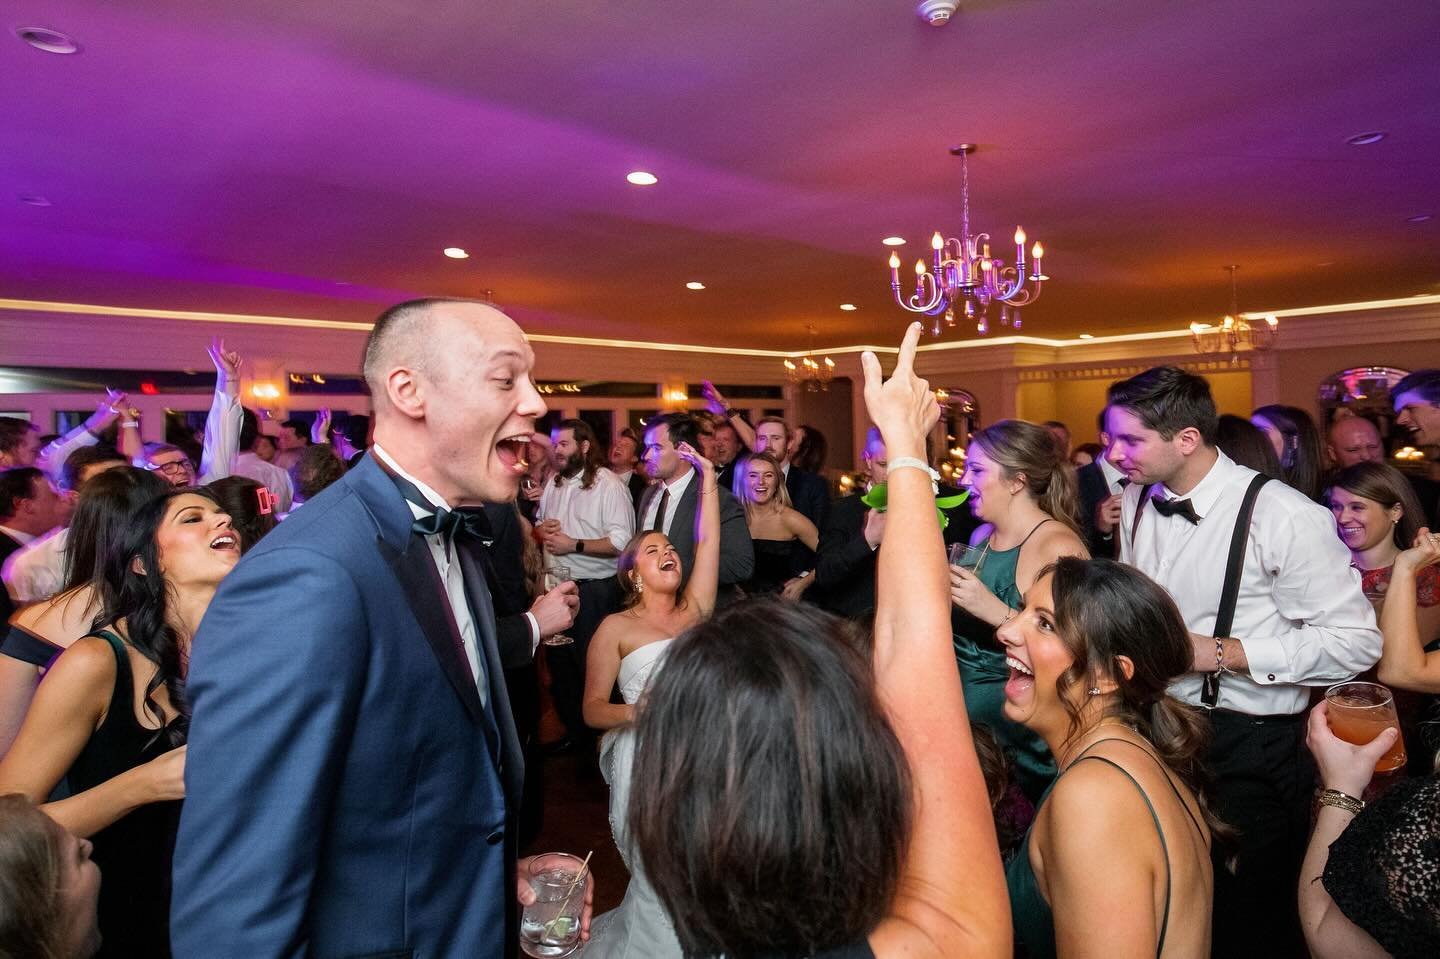 Joy and celebration filling every corner of Primrose Cottage 💃✨ What a magical night dancing the night away with the newlyweds and their lively guests! 🎉 #PrimroseCottageWeddings #DanceFloorDelights #WeddingCelebration #DanceParty #SaturdayNights

